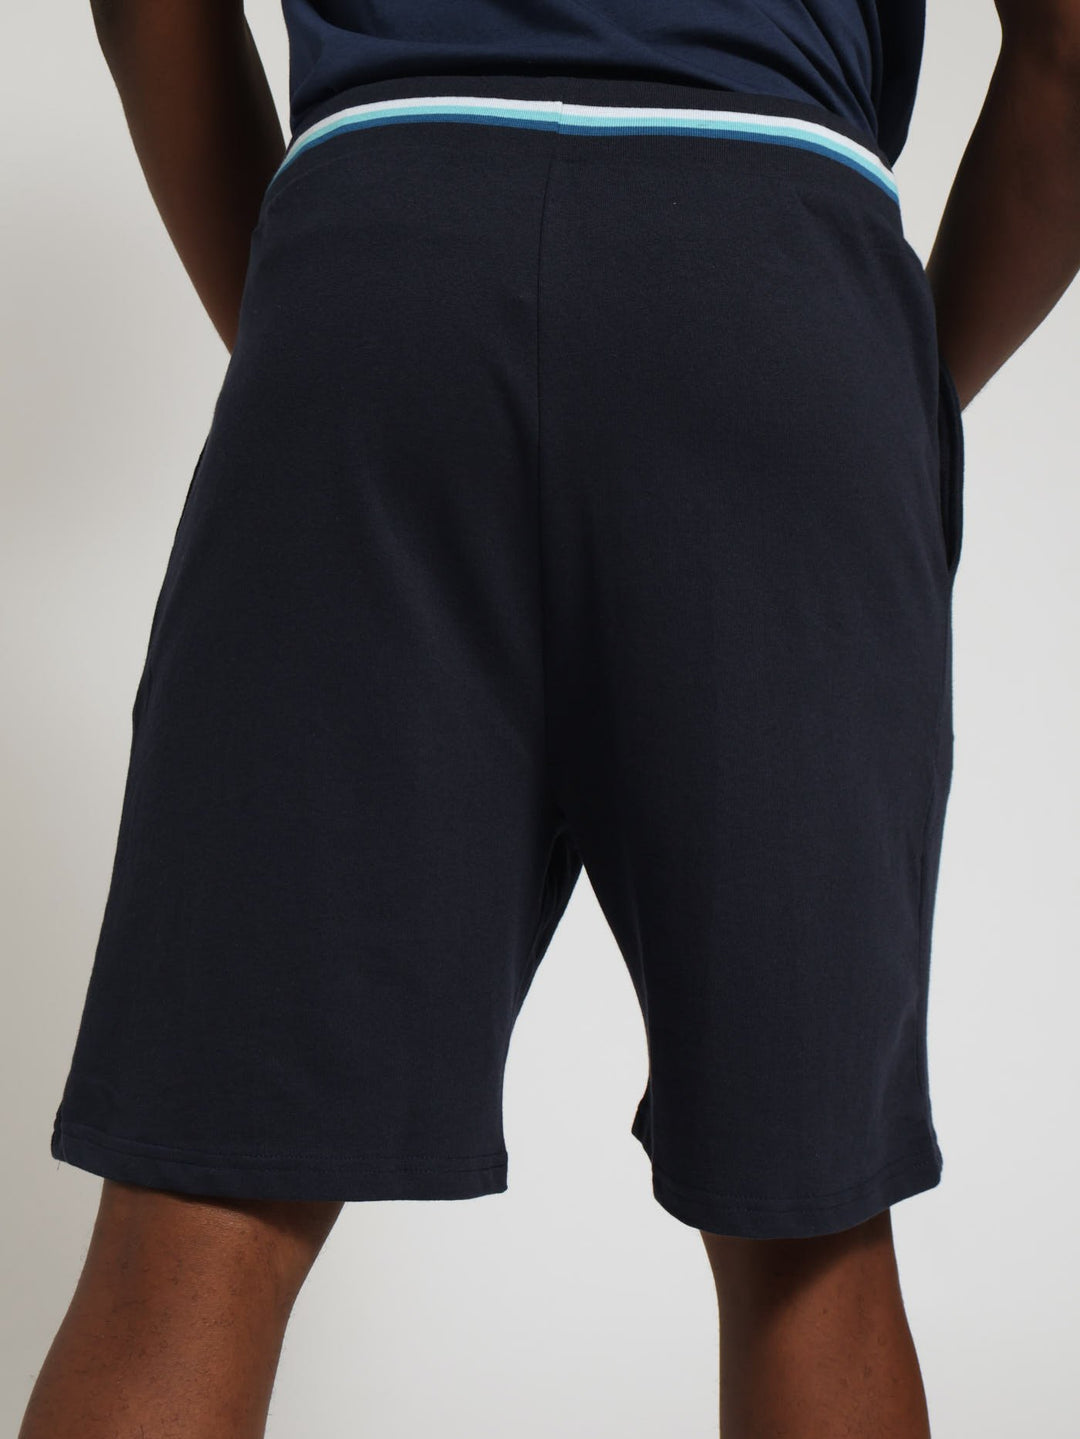 Unbrushed Fleece Knit Pj Shorts With Laid On Tape - Navy